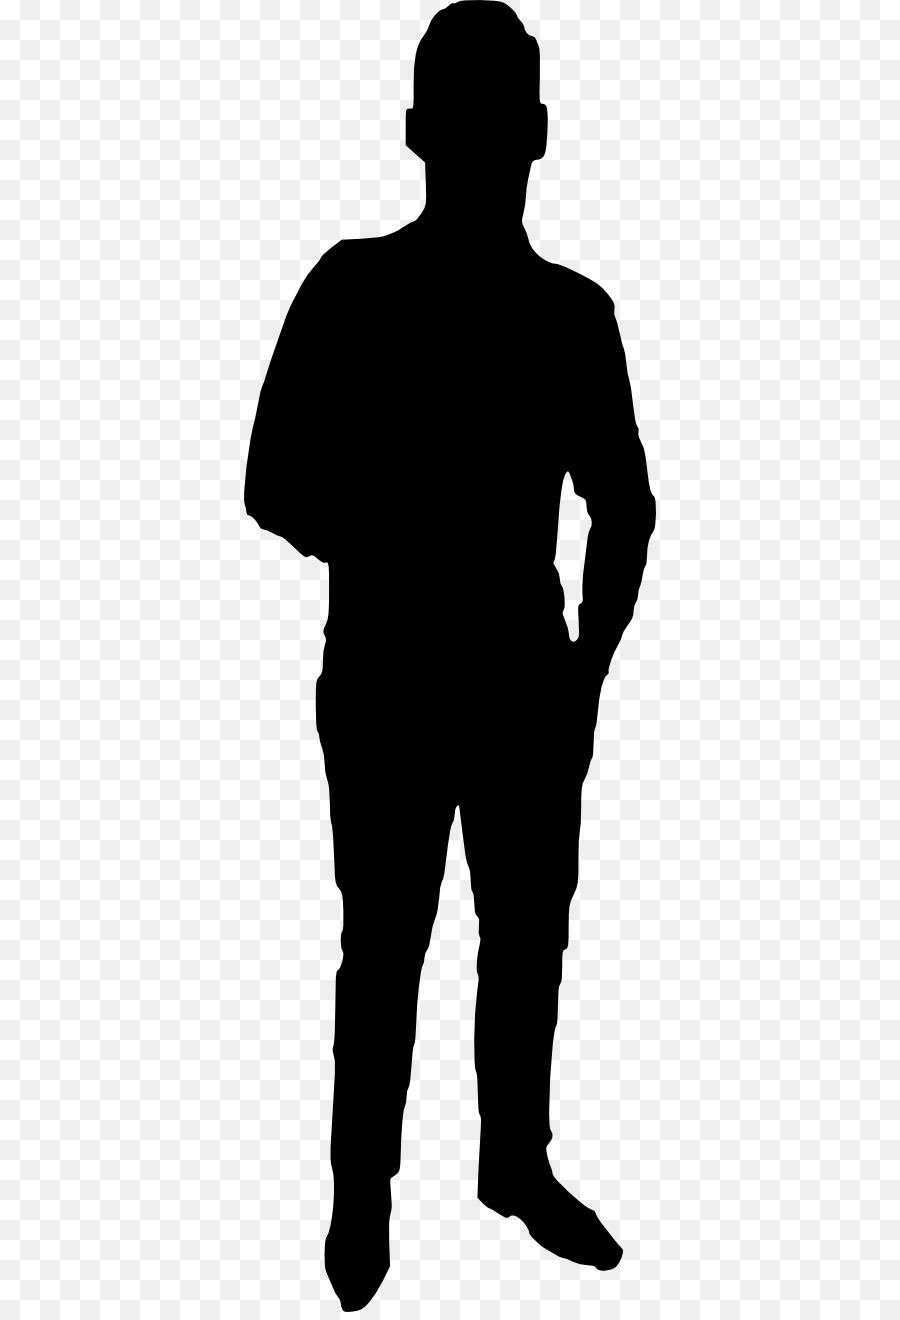 Portable Network Graphics Clip art Silhouette Image Person - person silhouette png sclance png download - 412*1312 - Free Transparent Silhouette png Download.